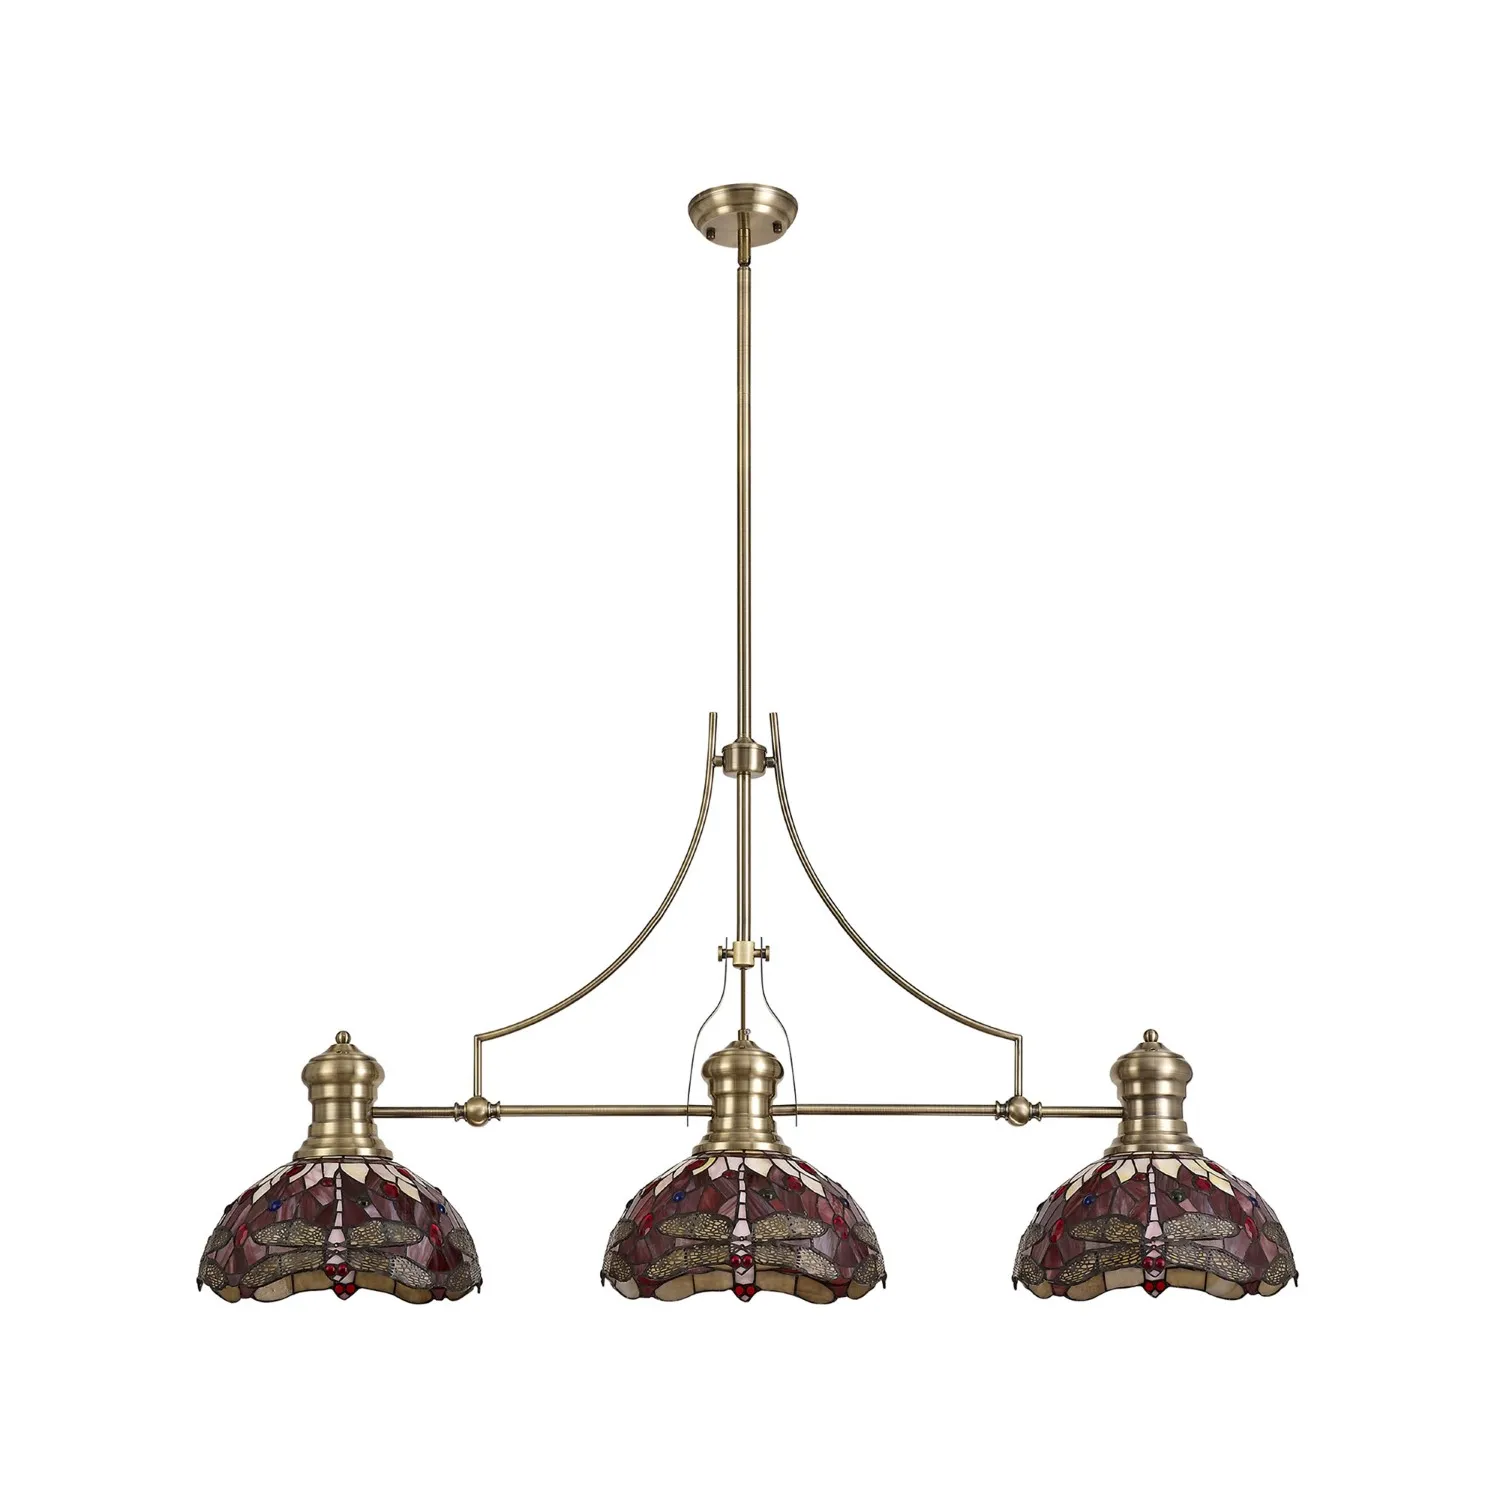 Hitchin 3 Light Linear Pendant E27 With 30cm Tiffany Shade, Antique Brass, Purple, Pink, Crystal